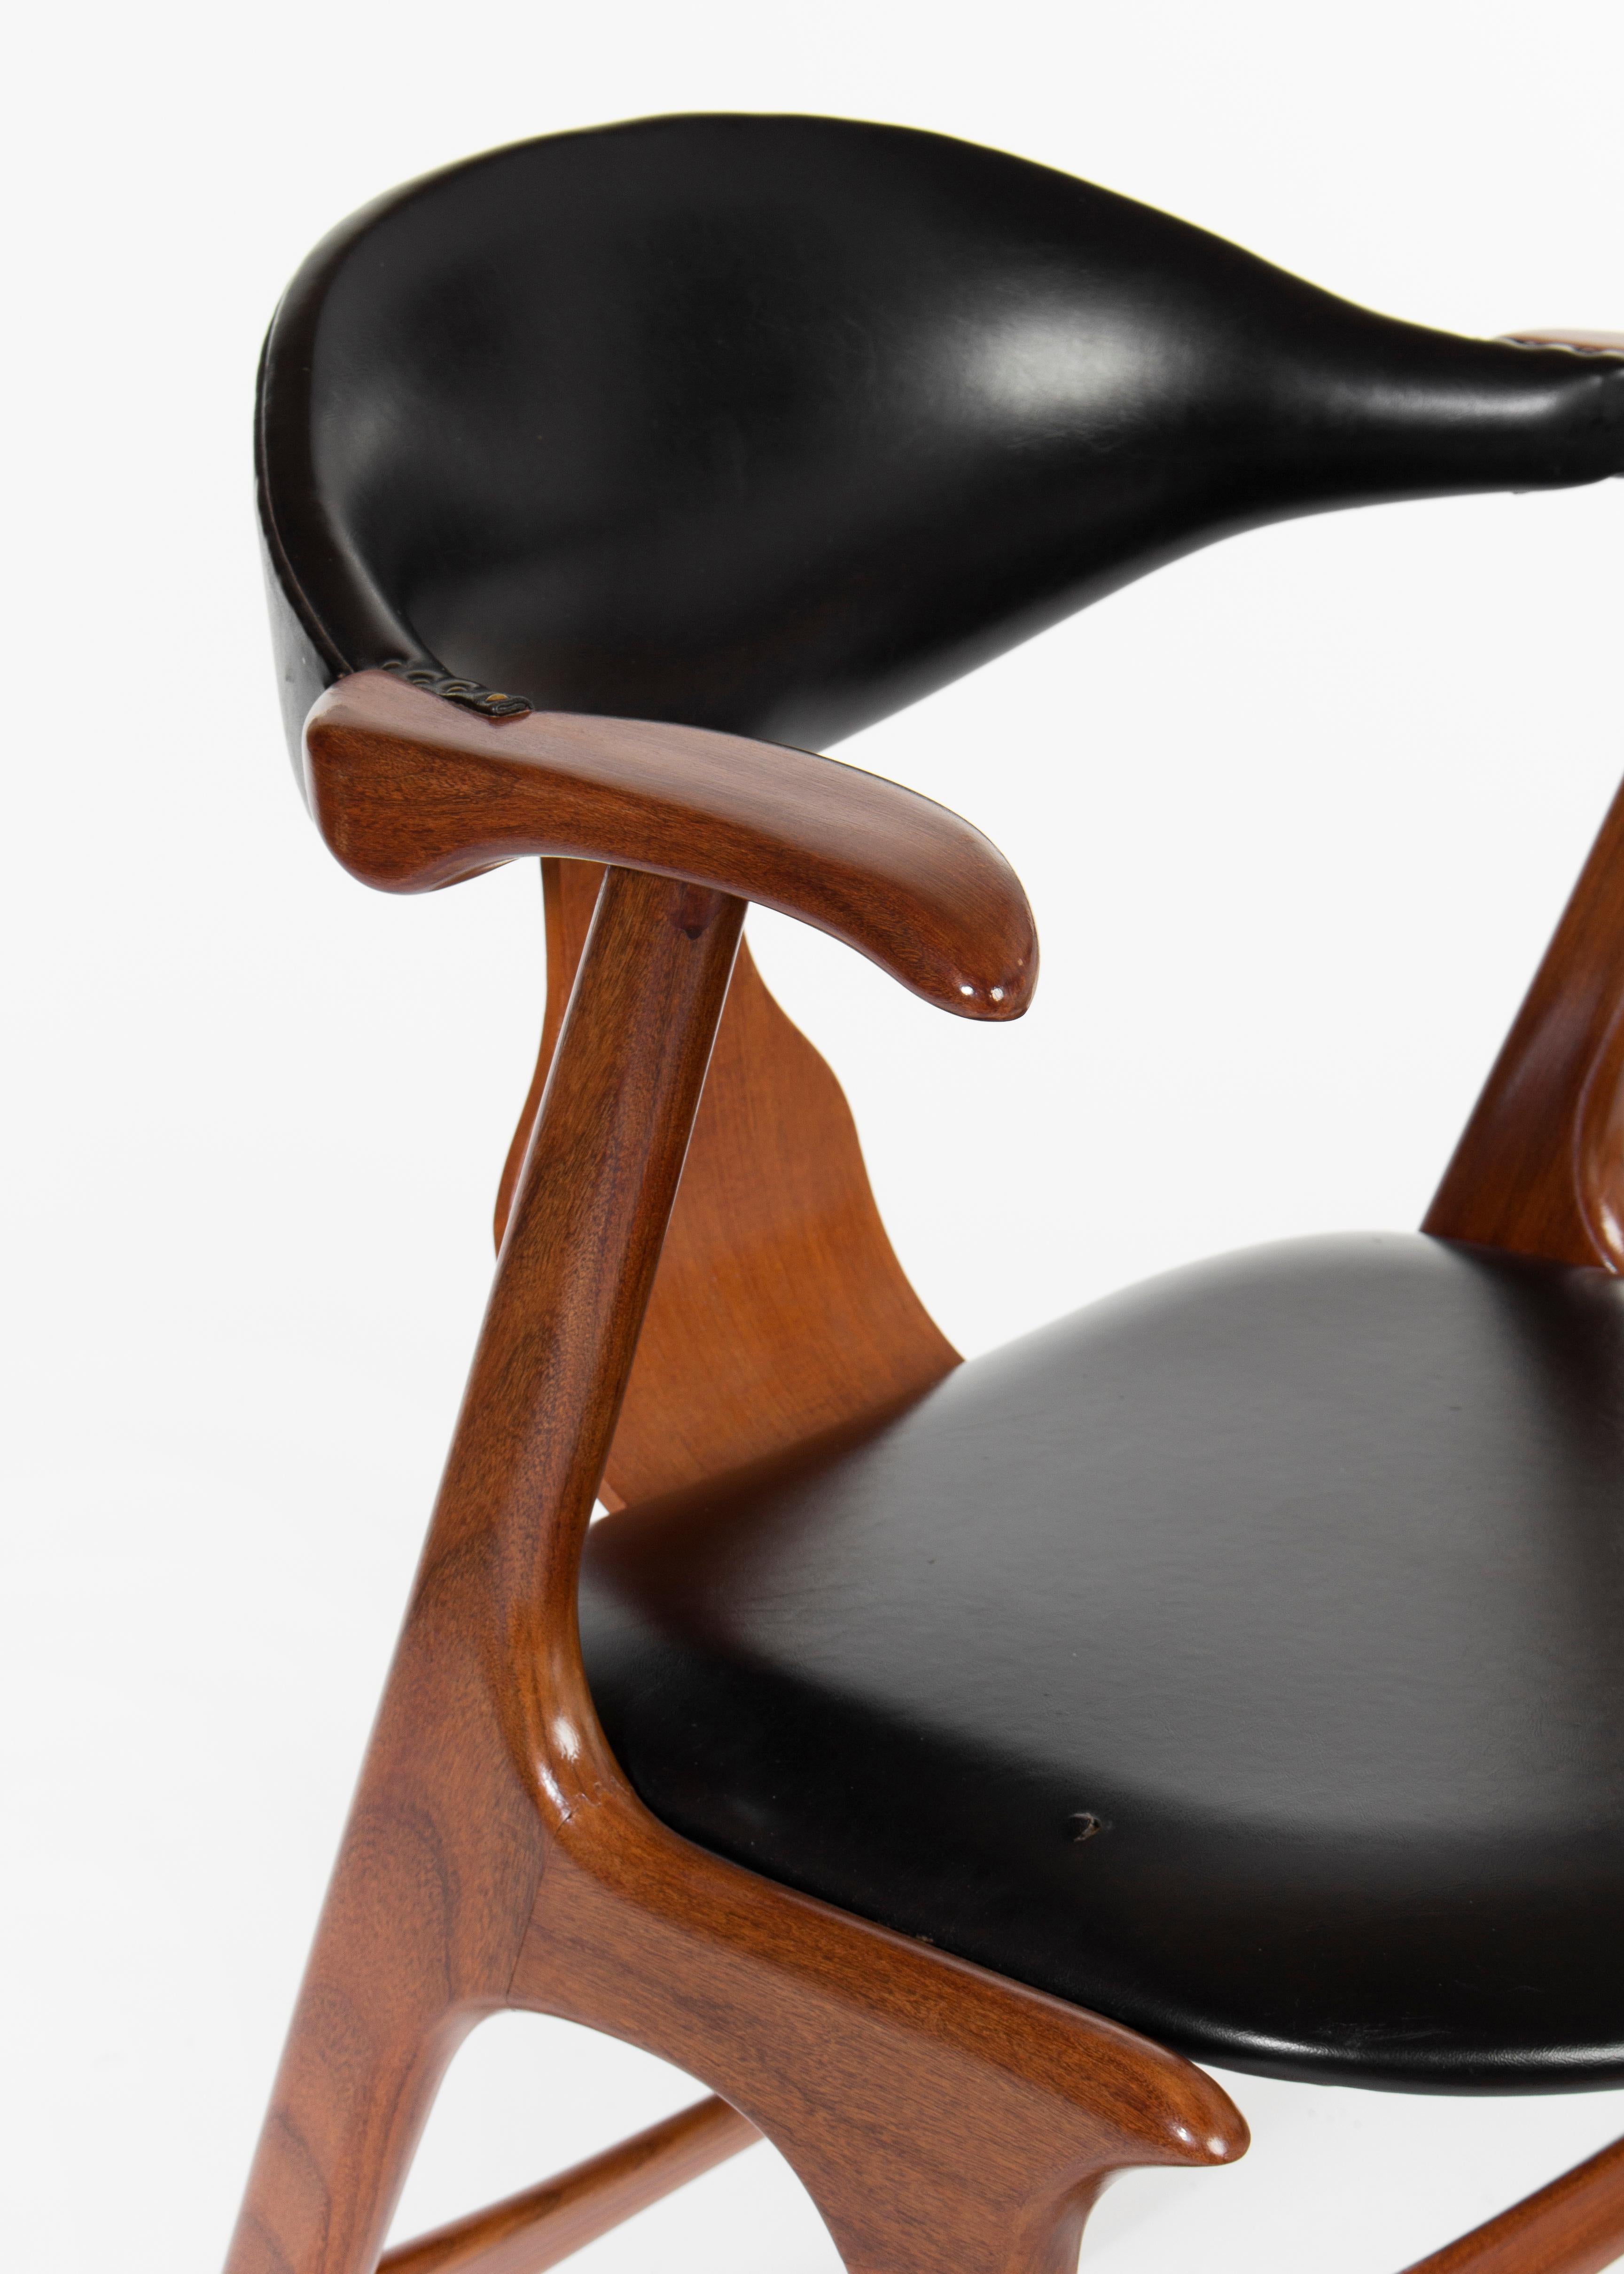 Louis Van Teeffelen AWA Holland Cow Horn Chairs, 1950s, '3 Pieces' In Fair Condition For Sale In Budapest, HU